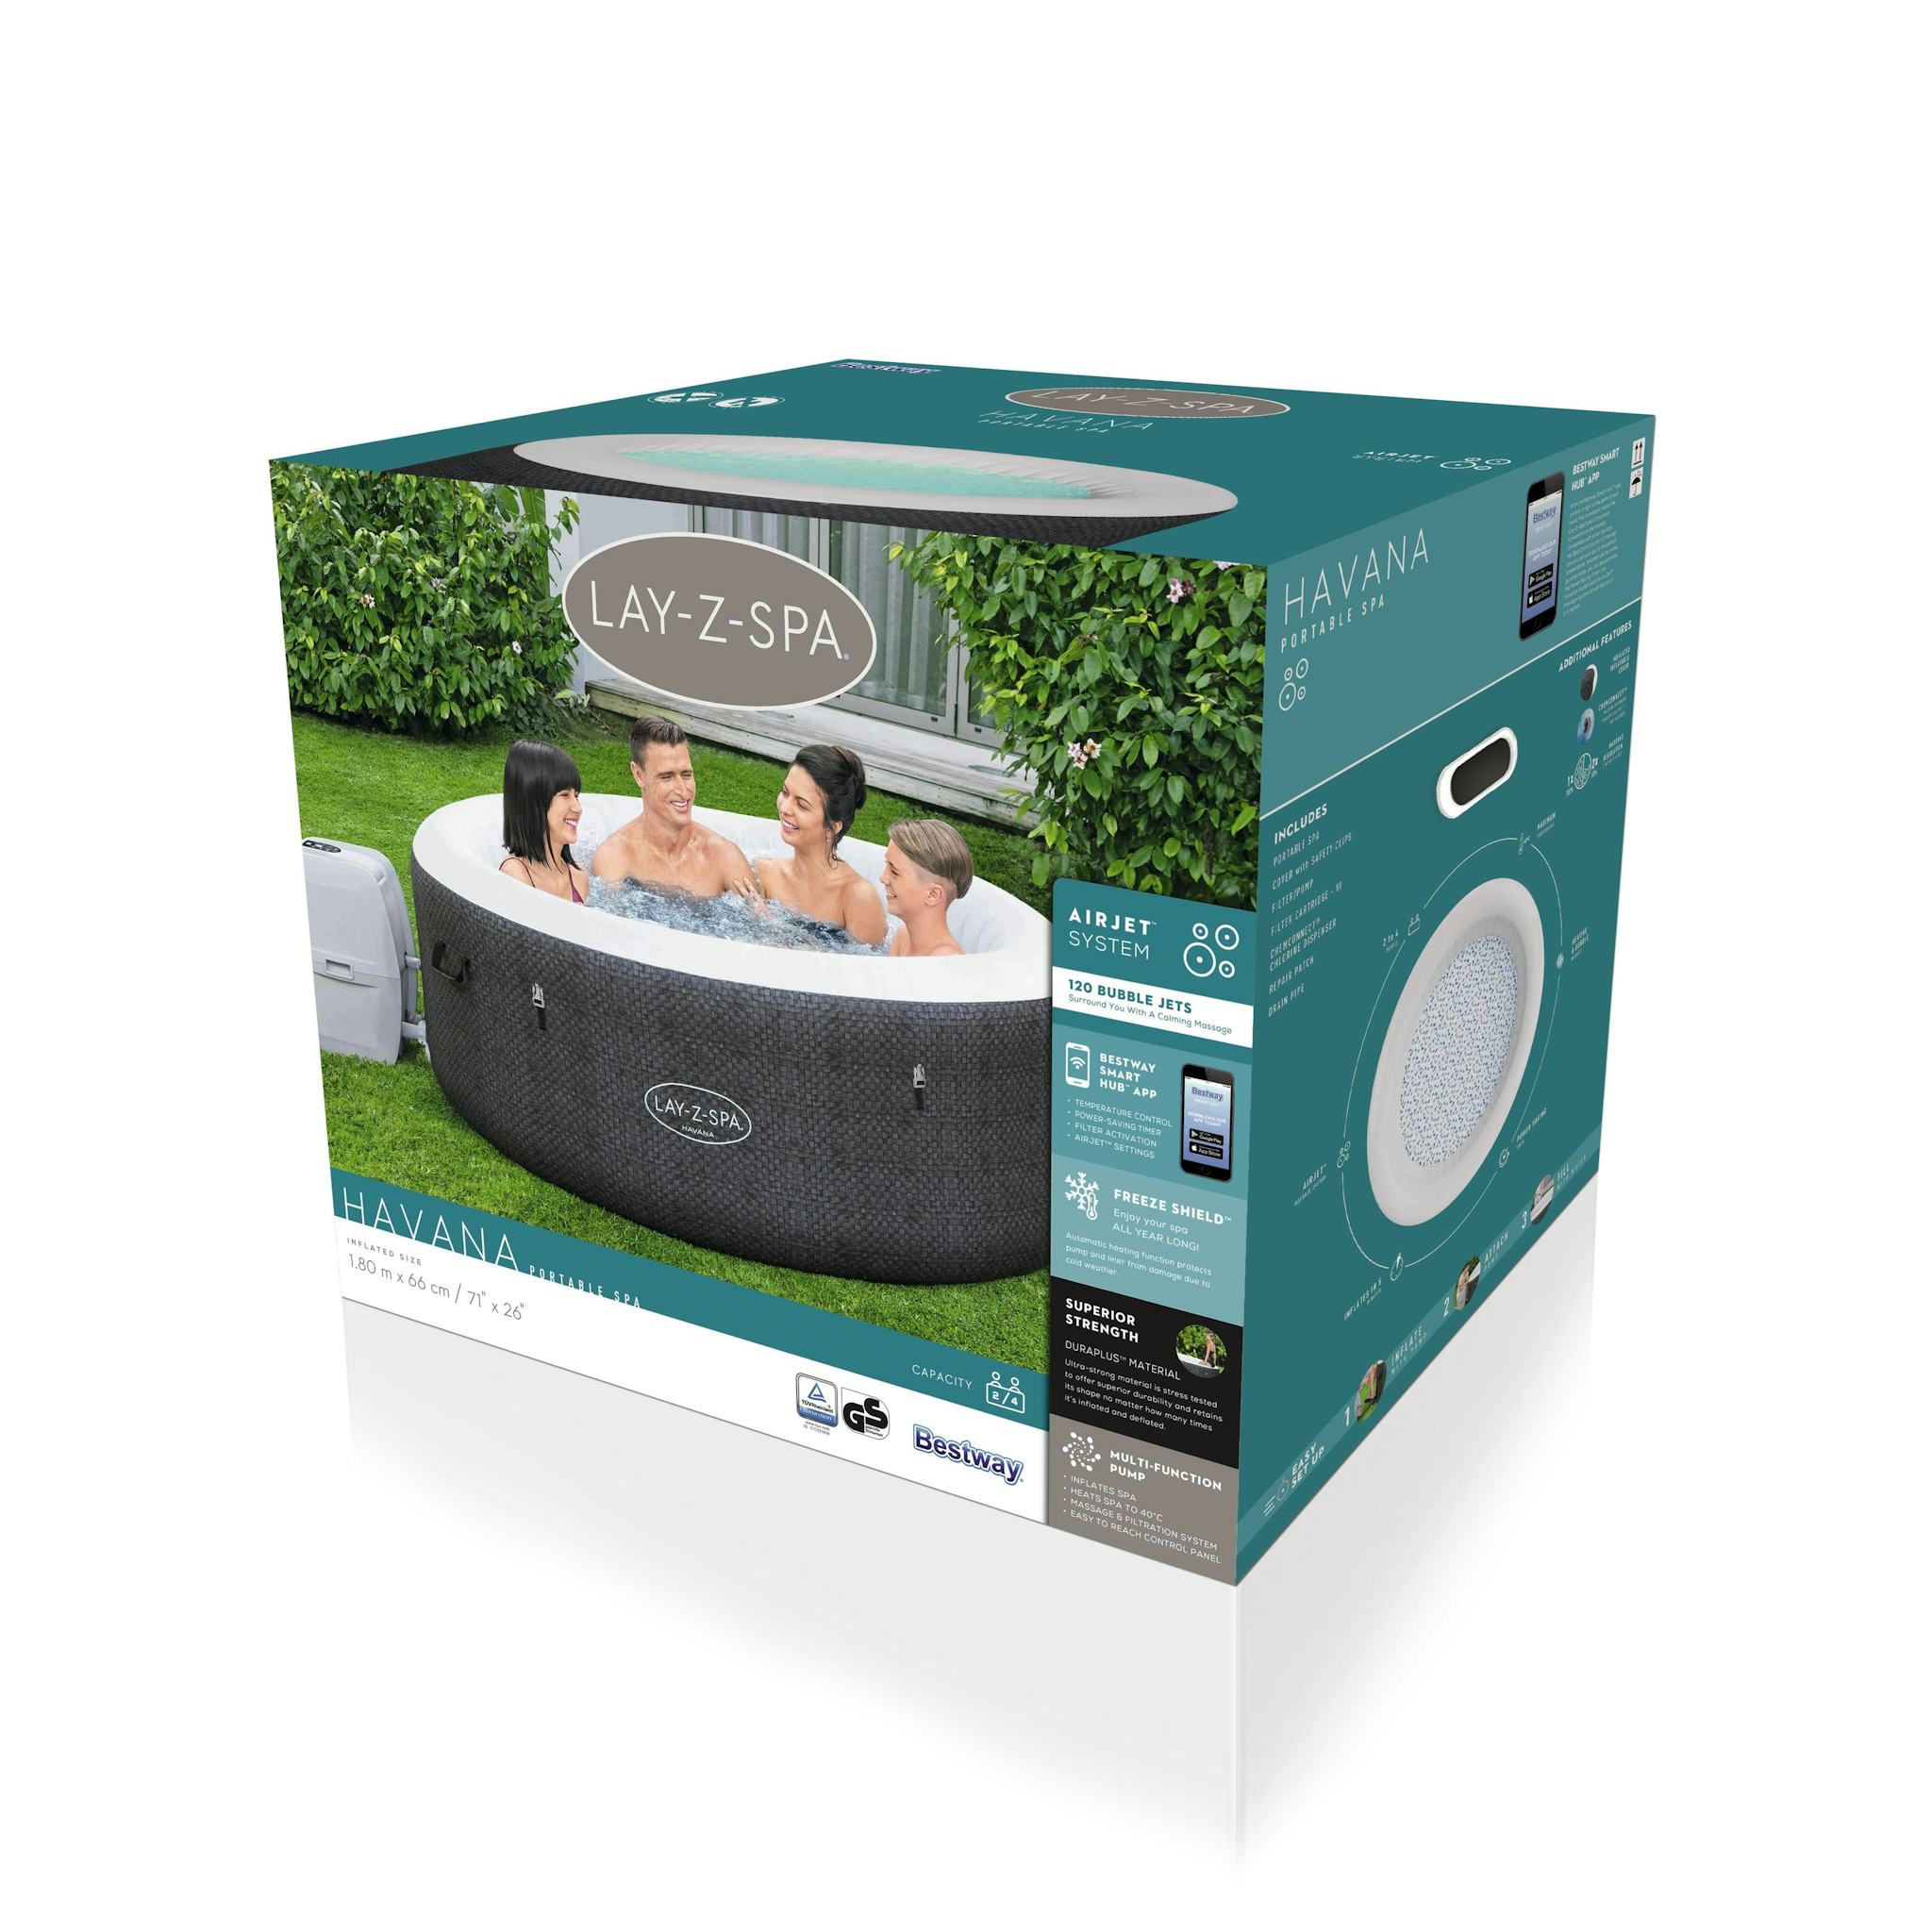 Spas Gonflables Spa gonflable rond Lay-Z-Spa Havana Airjet™ 2 - 4 personnes Bestway 17